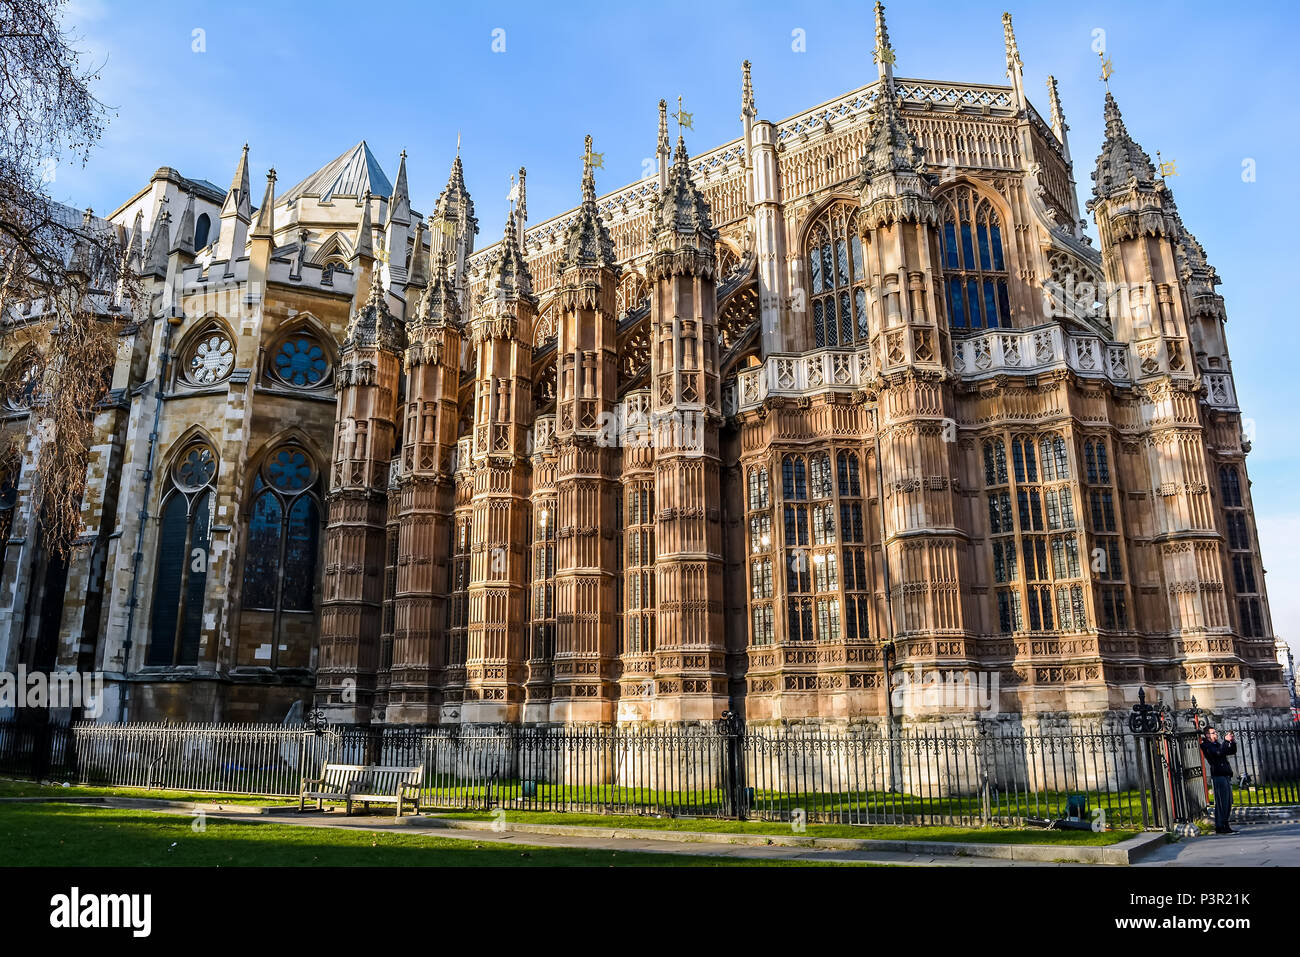 Henry VII's Lady Chapel of Westminster Abbey, the great masterpiece of English medieval Perpendicular Gothic architecture. Stock Photo